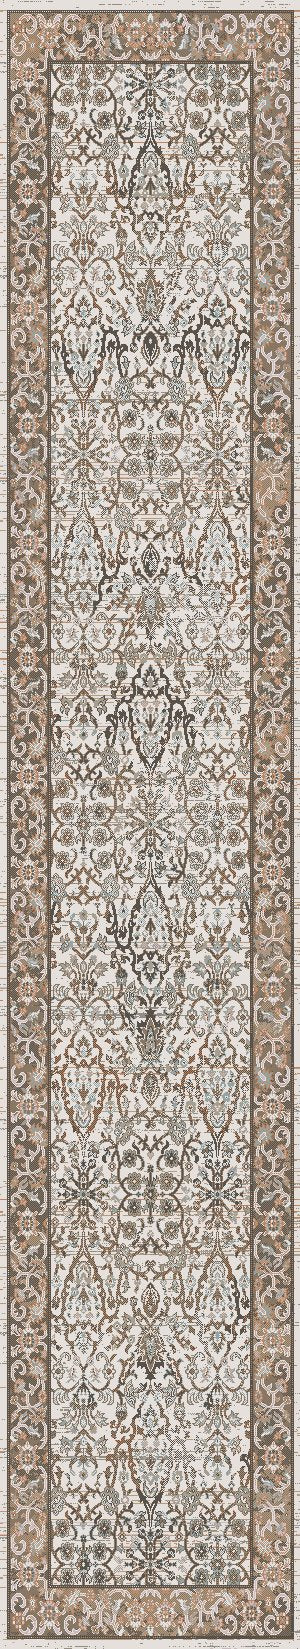 Dynamic Rugs Cullen 5702-801 Brown/Ivory Area Rug